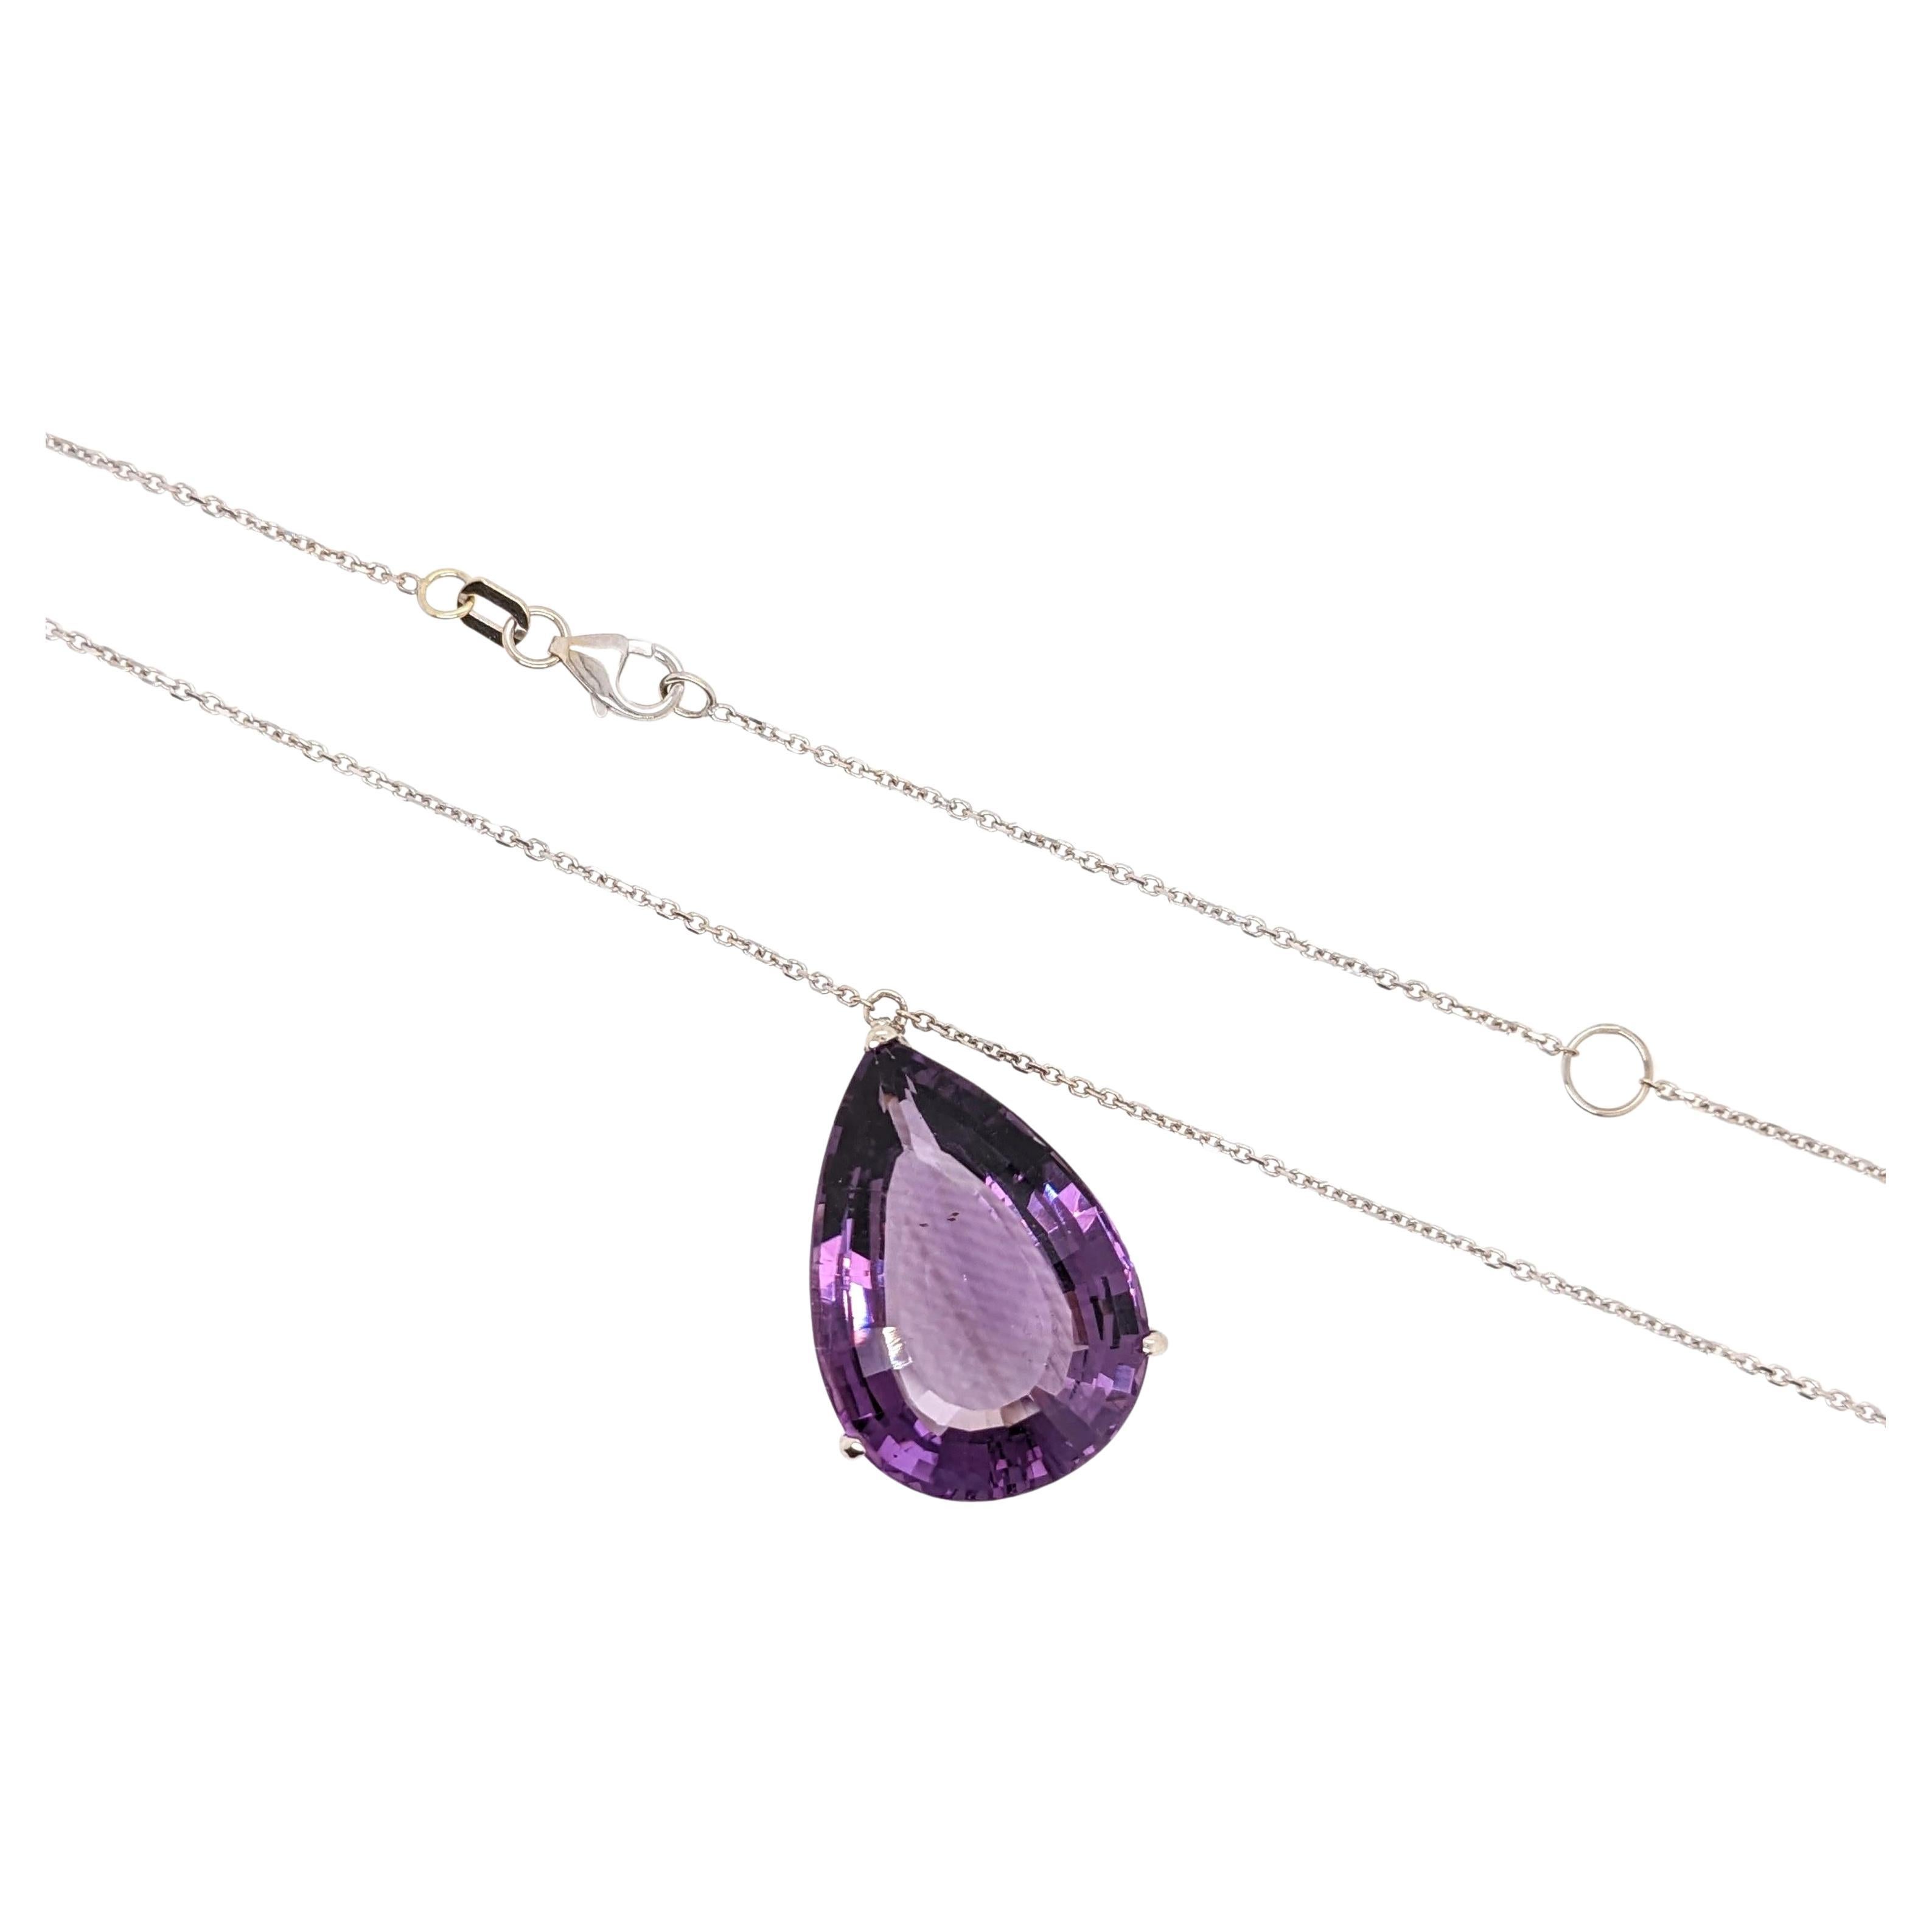 18ct Amethyst Pendant Necklace in Solid 14K White Gold Pear Shape